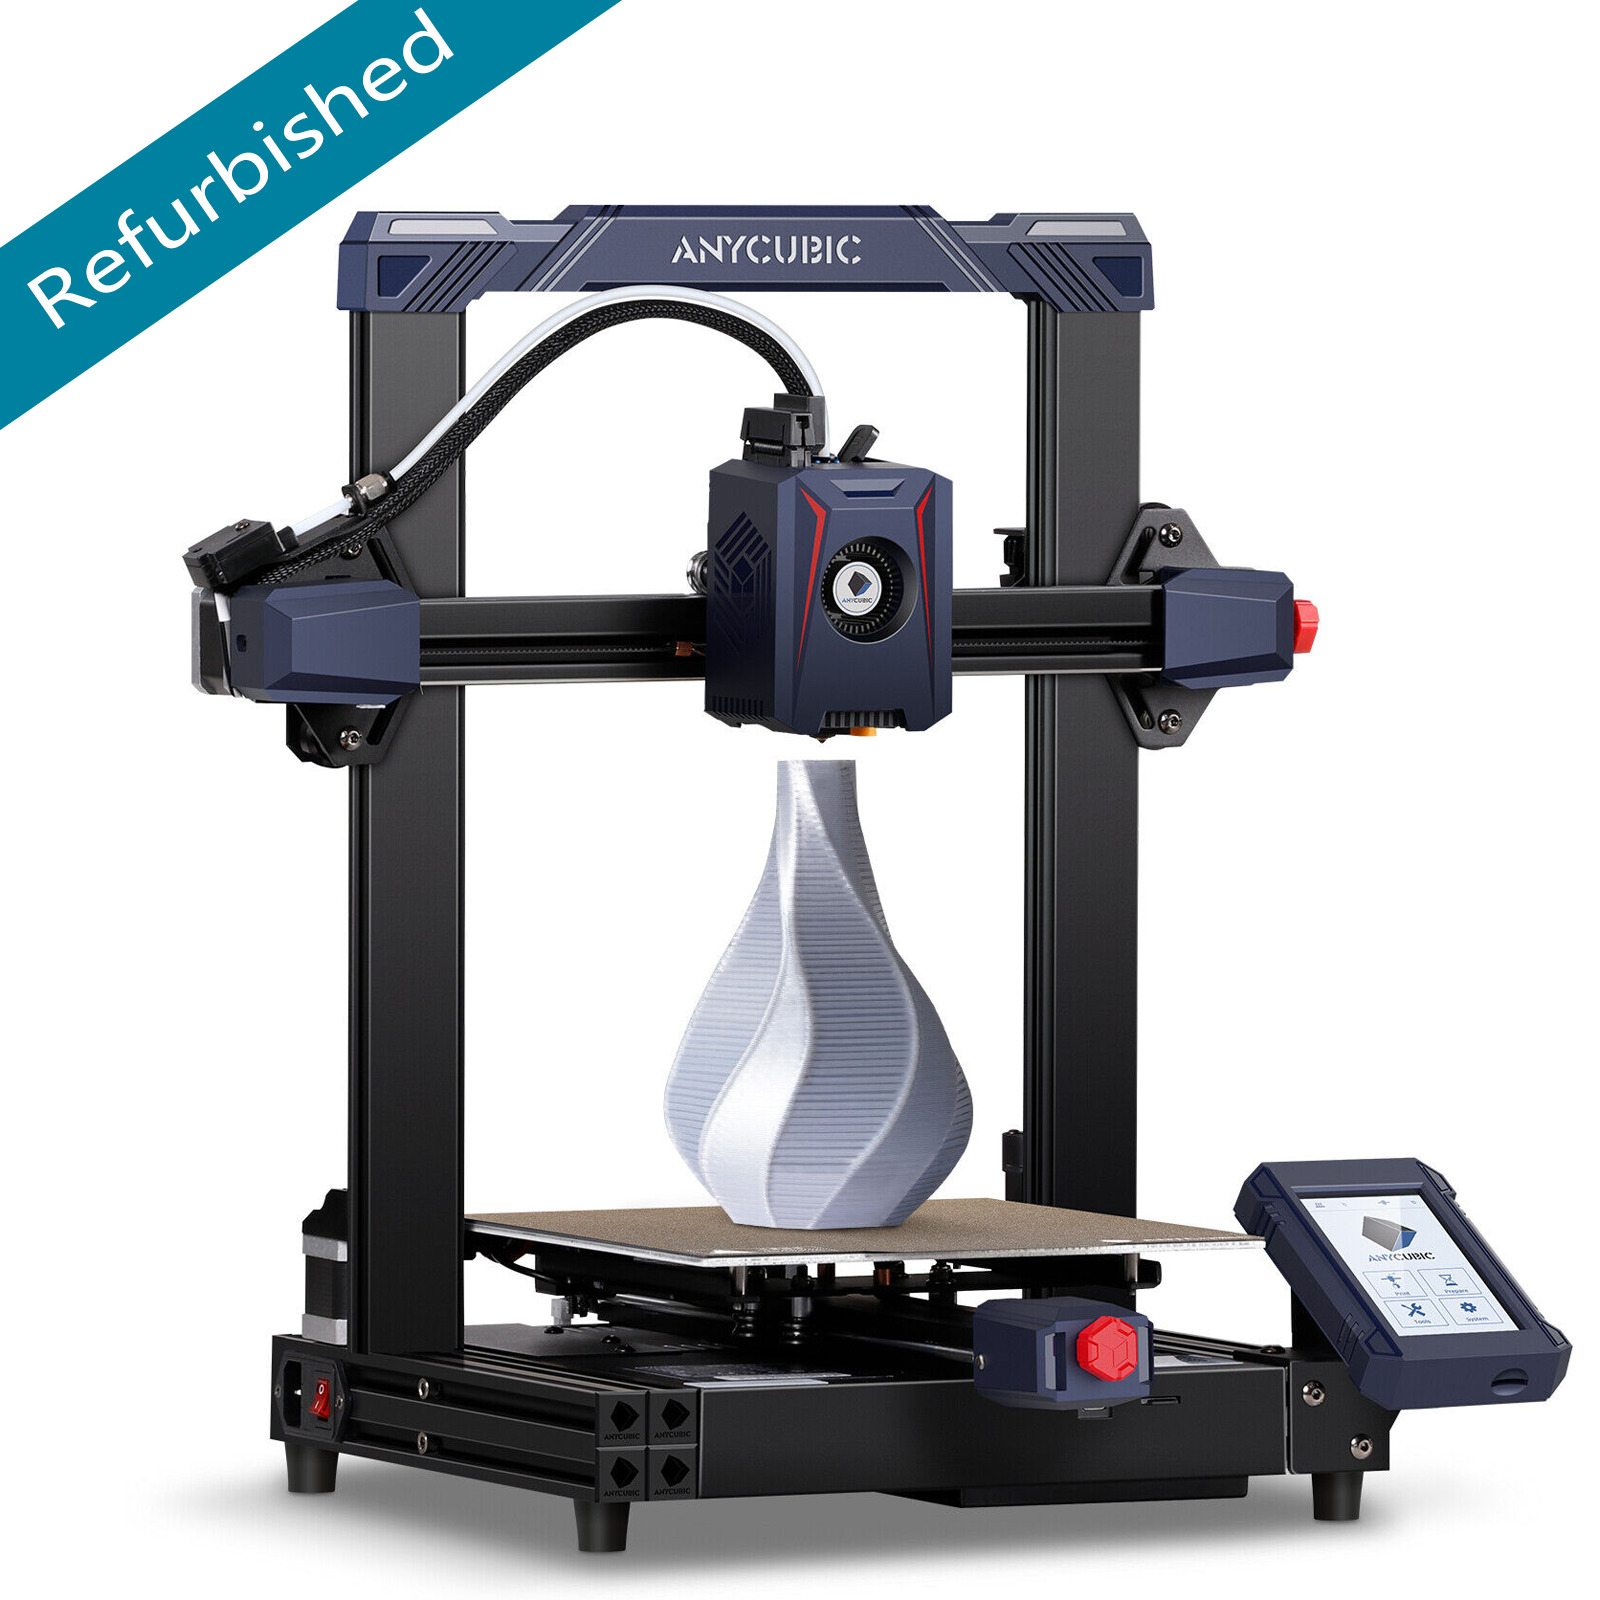 【Refurbished】ANYCUBIC KOBRA 2 FDM 3D Printer Auto-leveling Max 300mm/s Speed